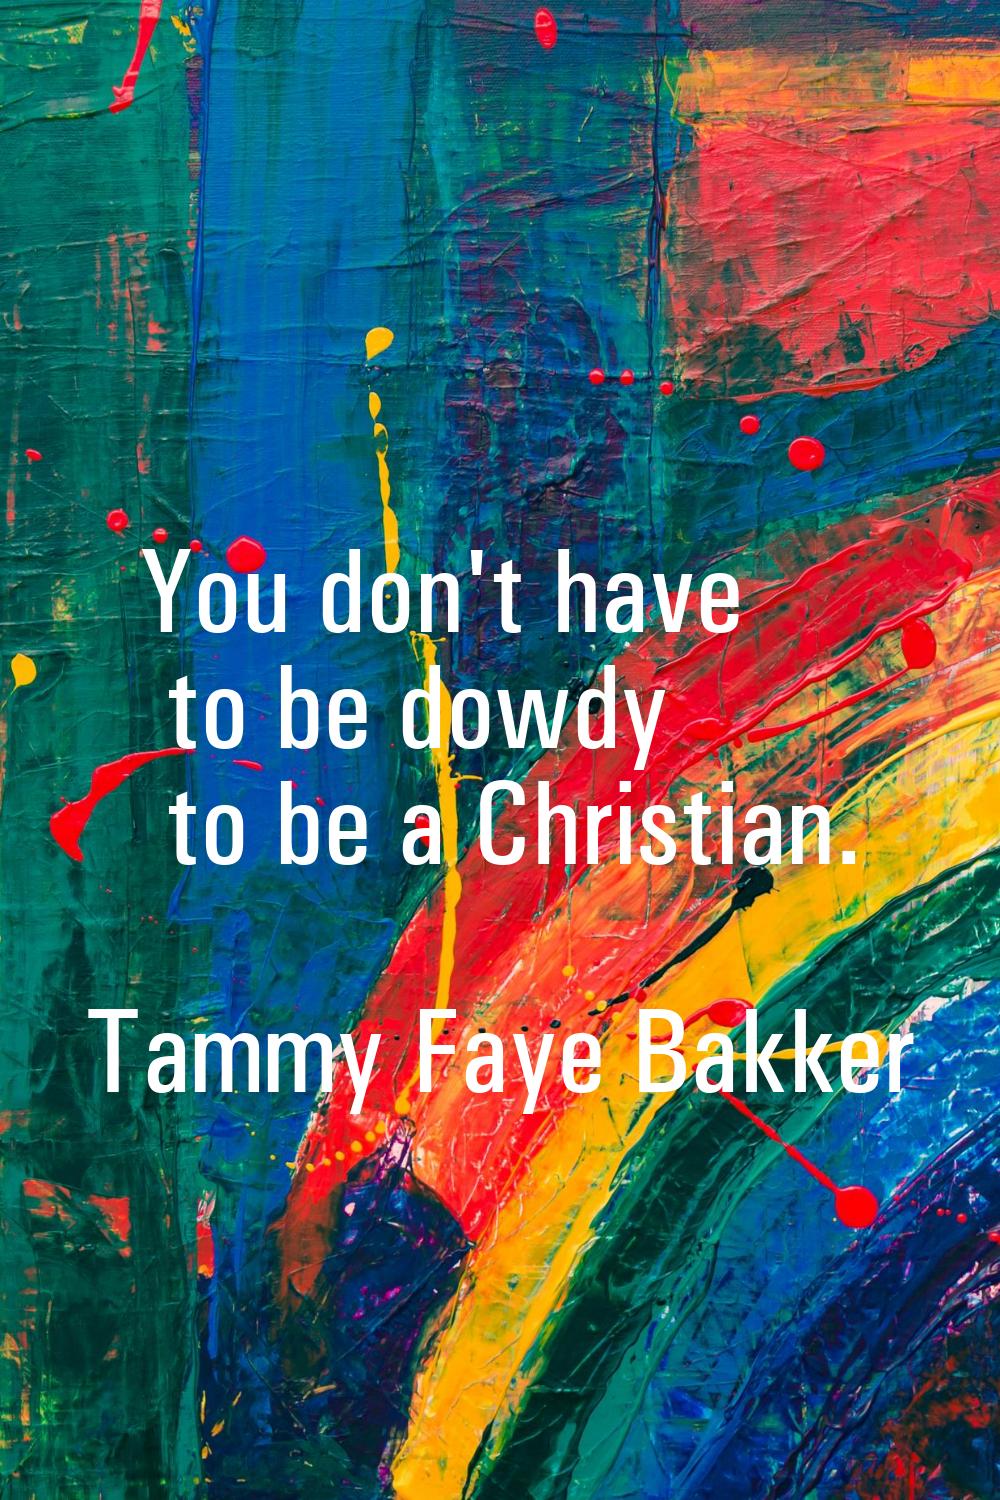 You don't have to be dowdy to be a Christian.